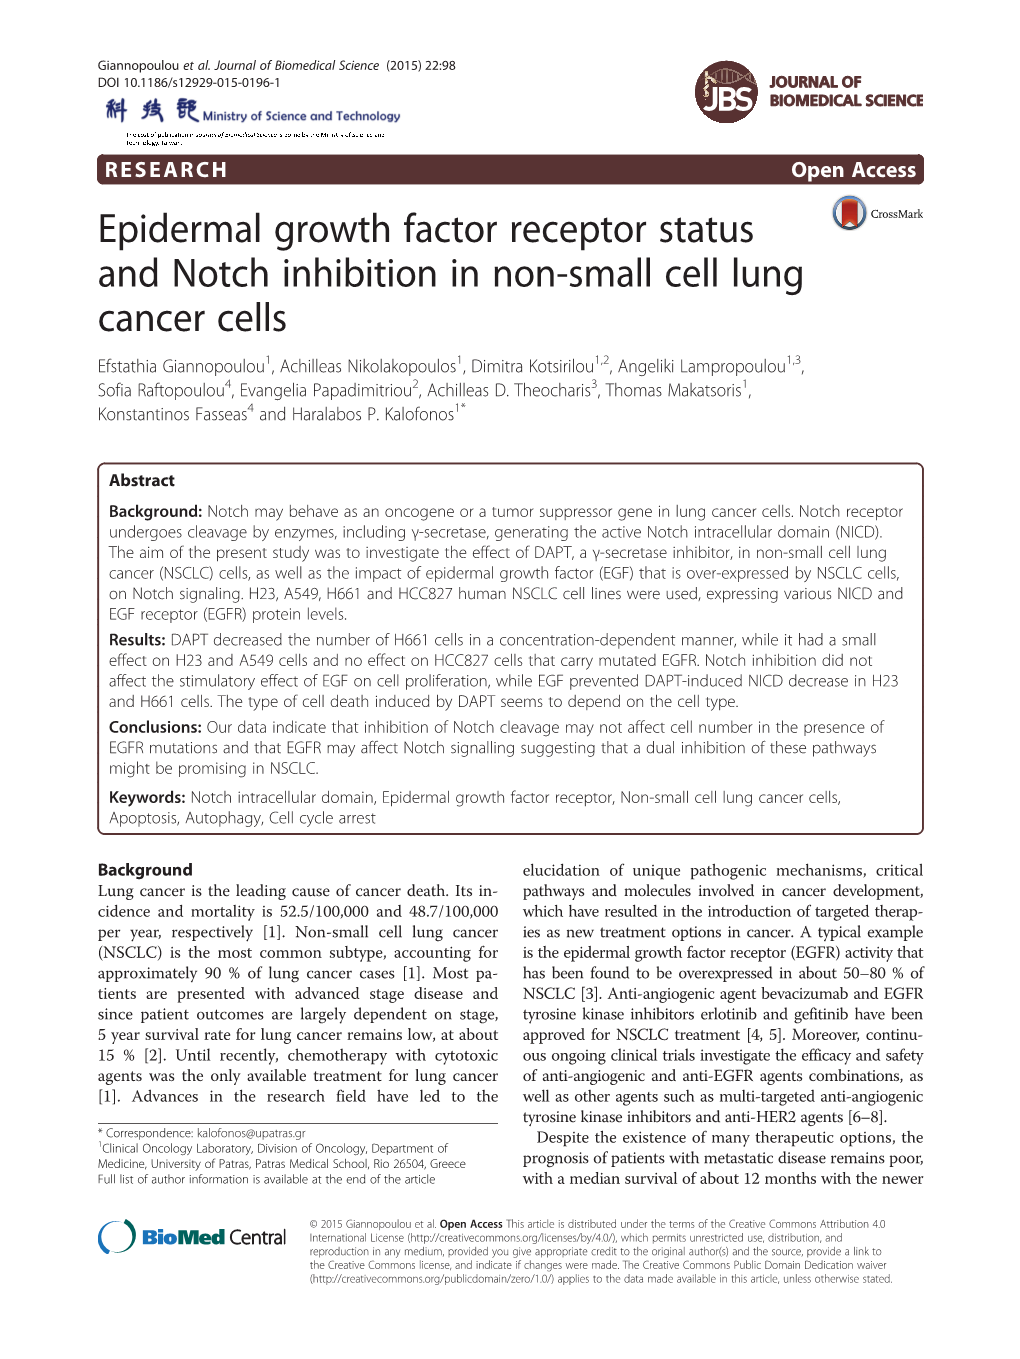 Epidermal Growth Factor Receptor Status and Notch Inhibition in Non